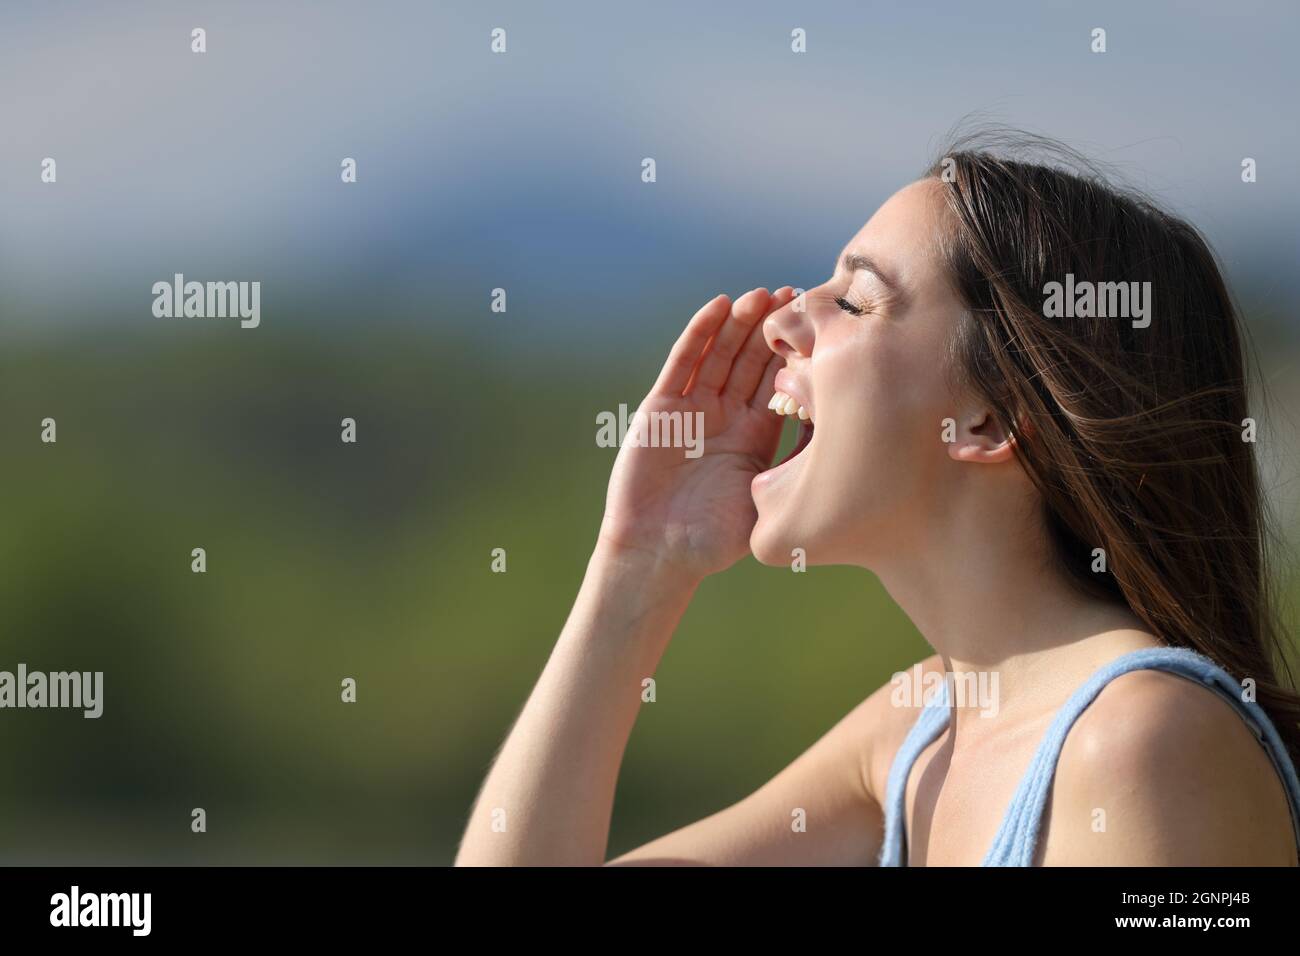 Profile of a woman shouting loudly in nature Stock Photo